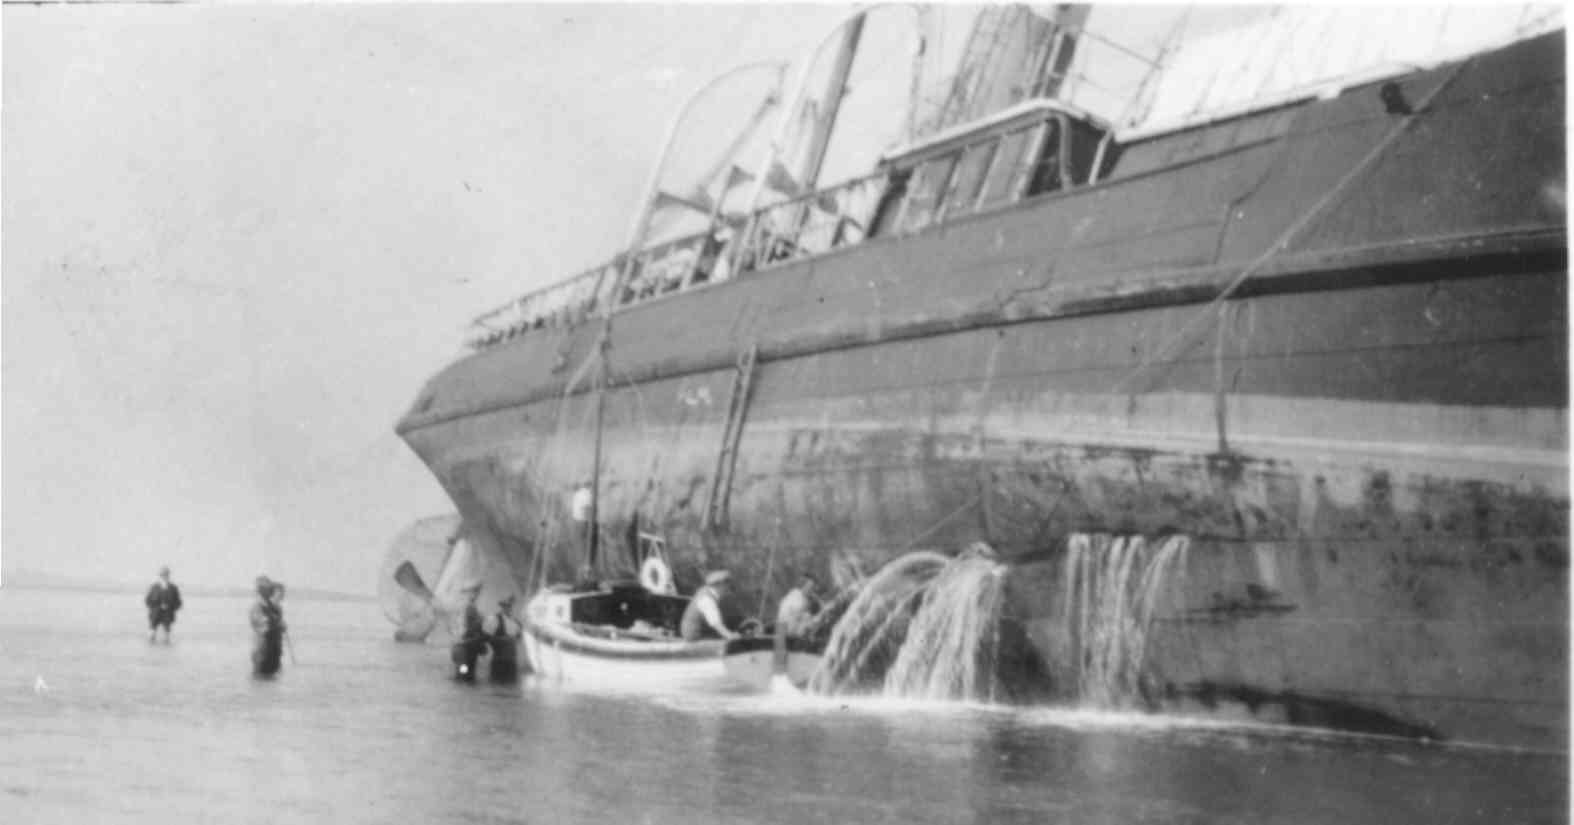 Albert Barnes and Harold Benest inspect the damage from the Diana while water gushes out the the hull of the stricken vessel